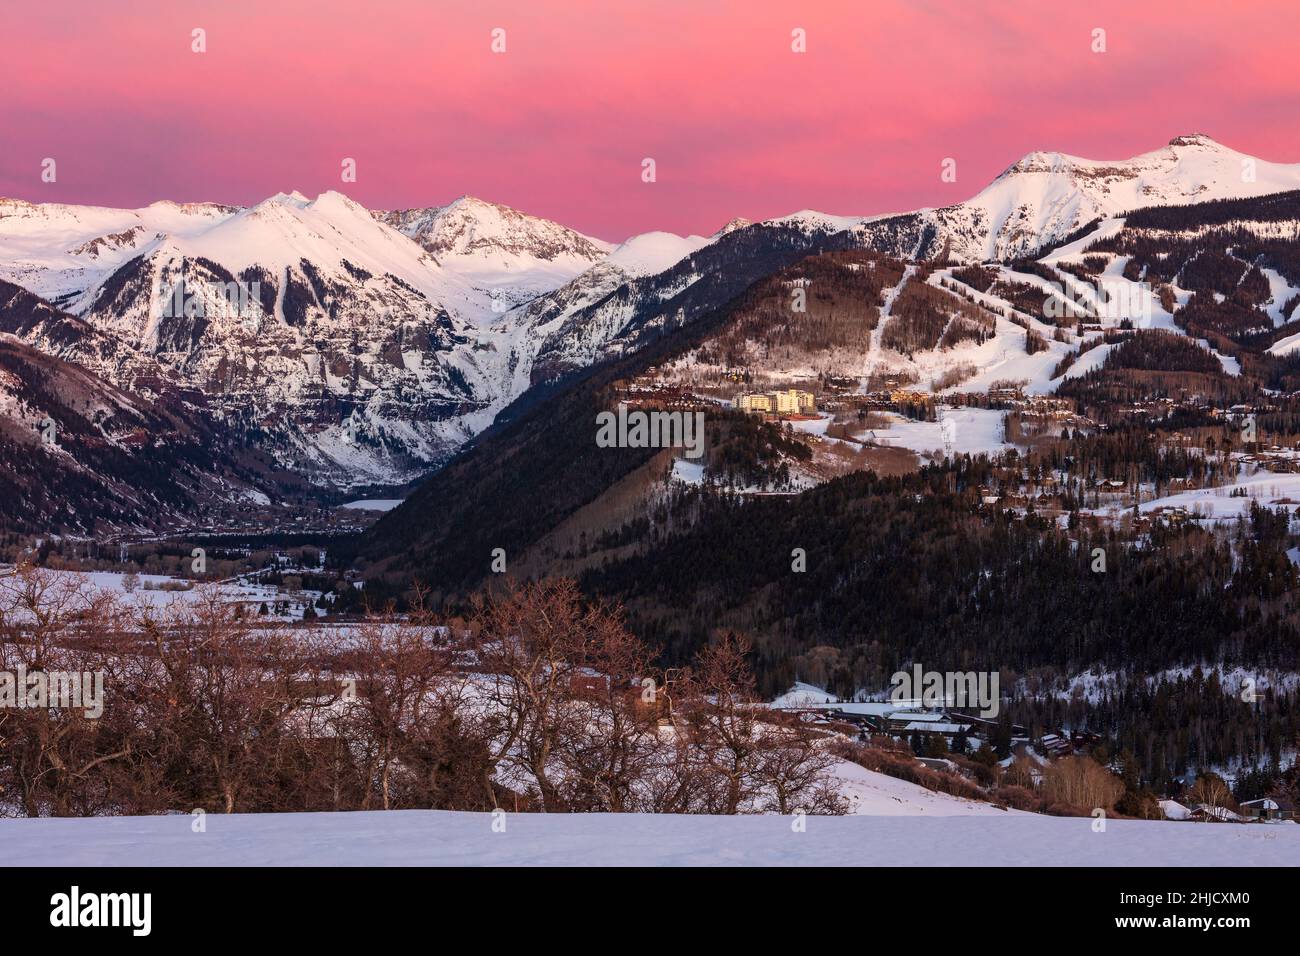 Scenic winter view of Mountain Village and Telluride, Colorado at sunset Stock Photo